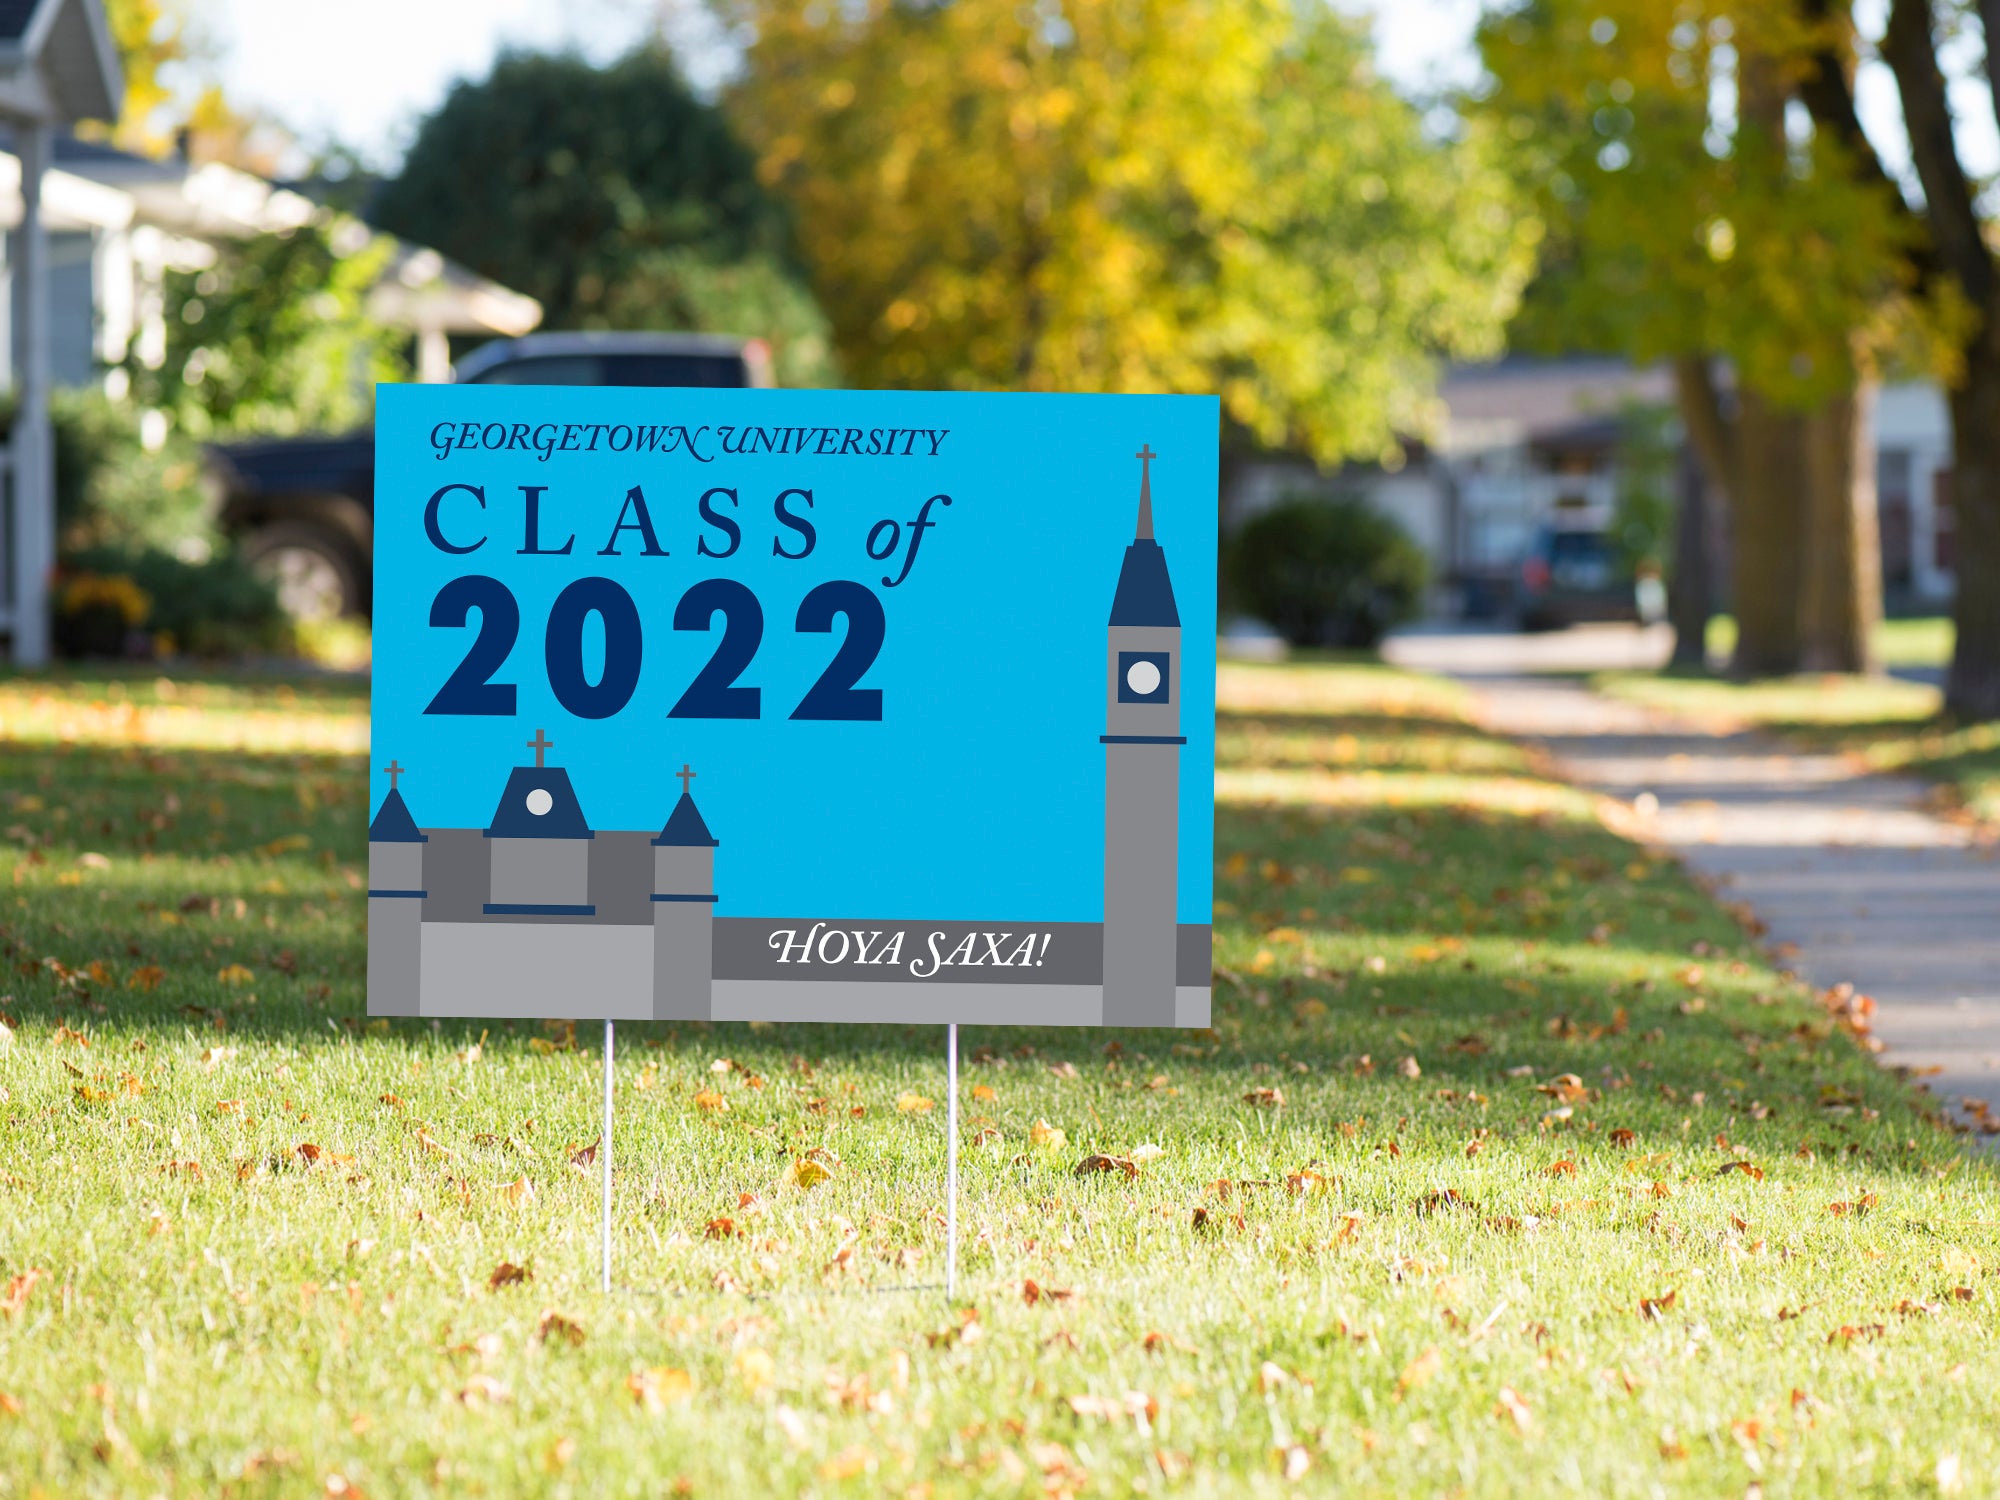 Yard sign with the skyline of Healy Hall and the text "Georgetown University Class of 2022 Hoya Saxa"